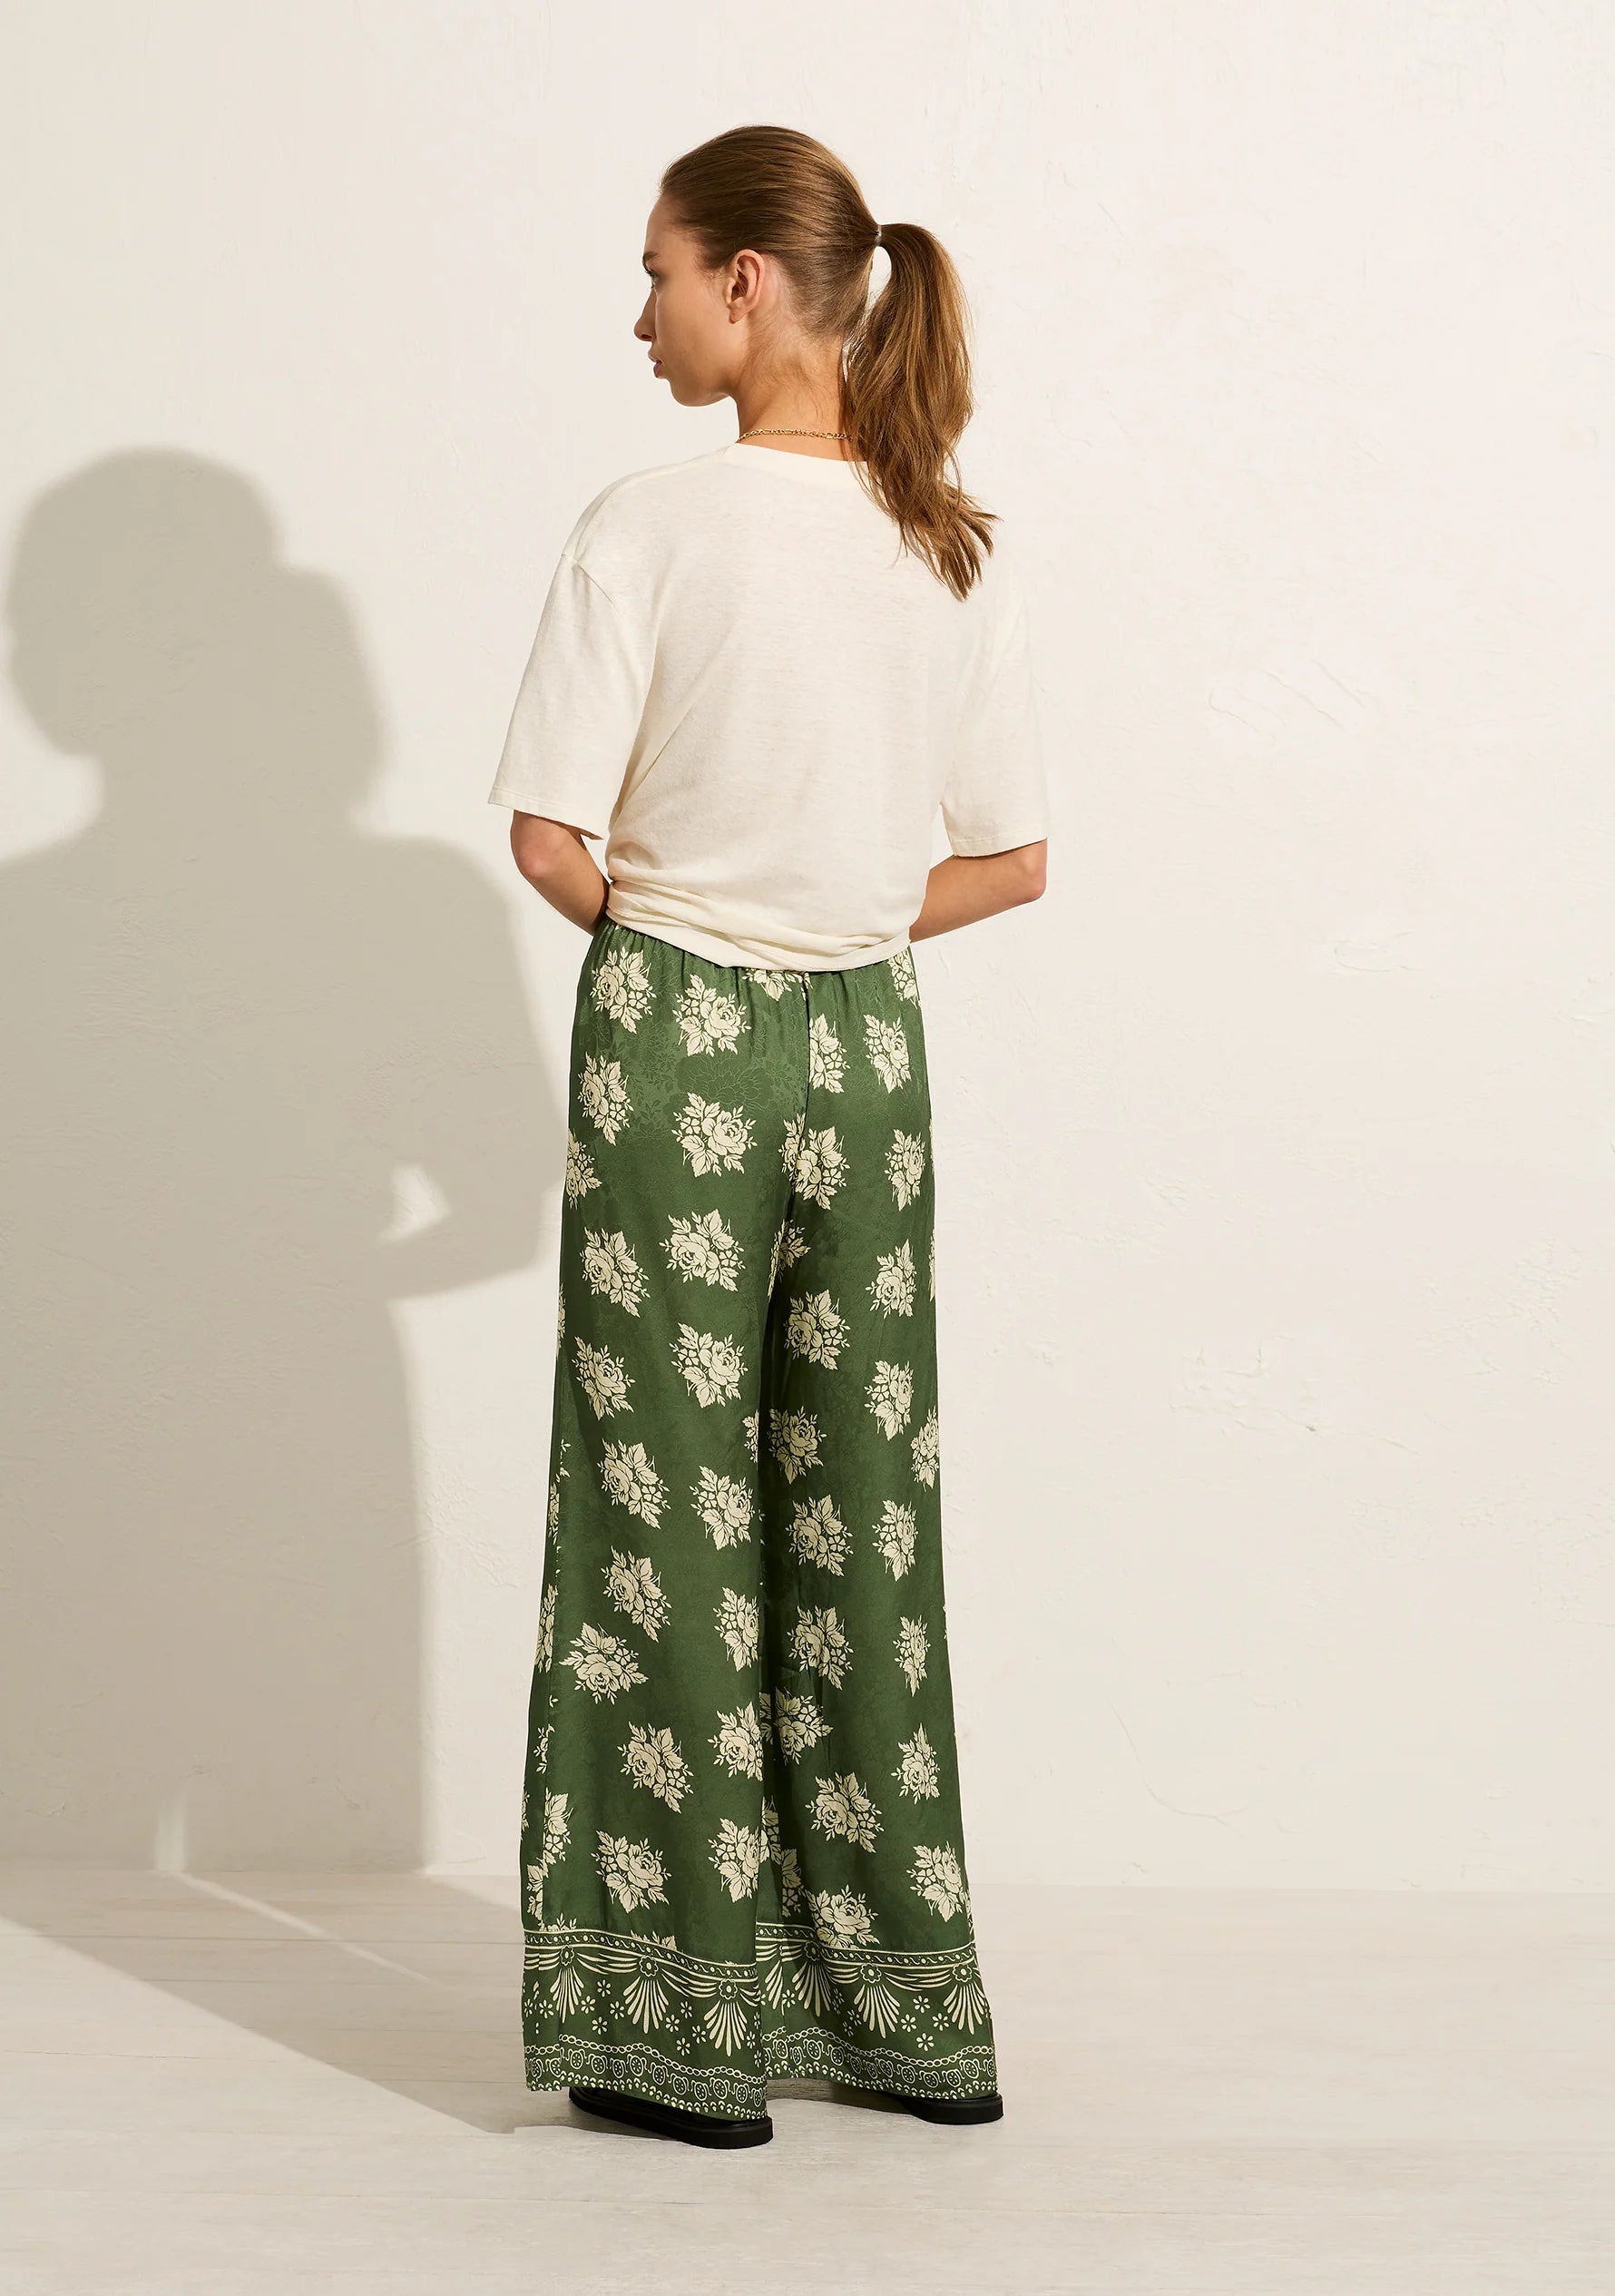 The Shyla Pant is crafted from viscose jacquard with a silky floral finish. In our green Mabel print with a contrast border print cuff, this style offers a high-rise fit, an elasticated waistband with a functional drawcord and a wide-leg design